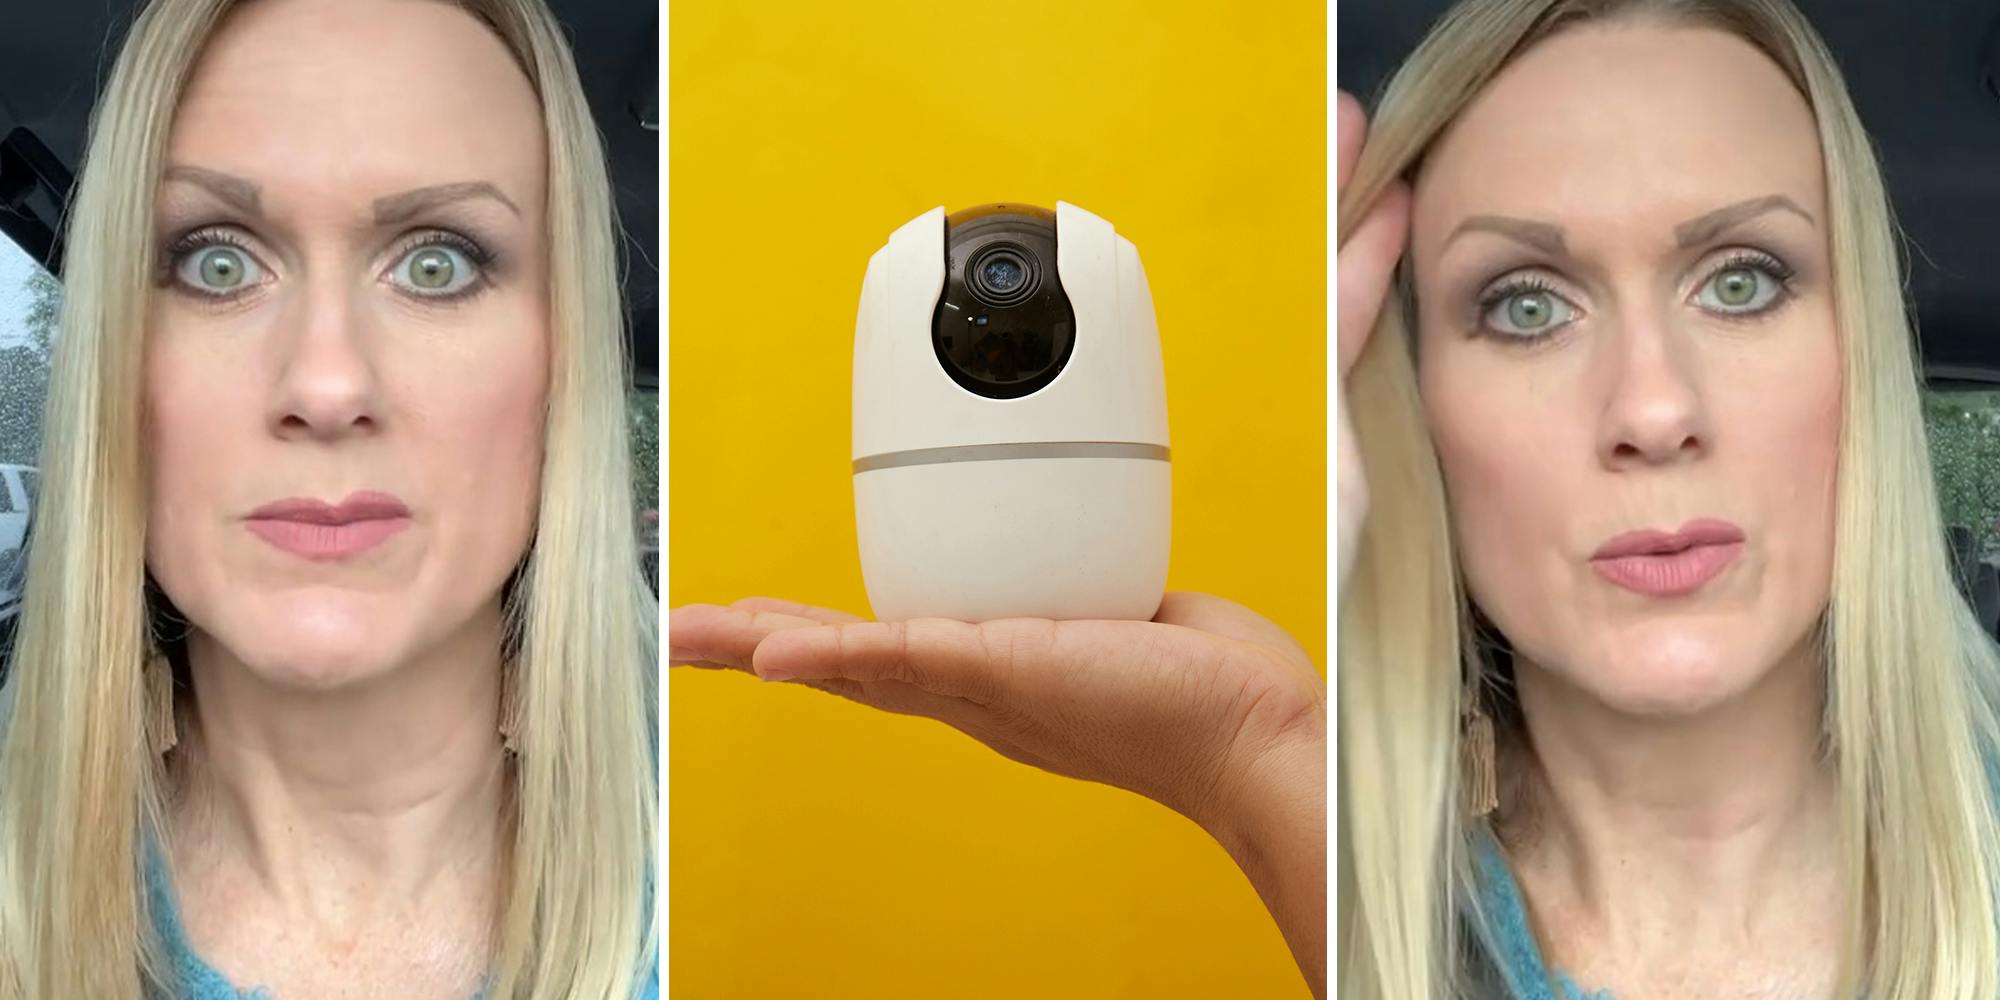 Woman issues warning to everyone who has security cameras